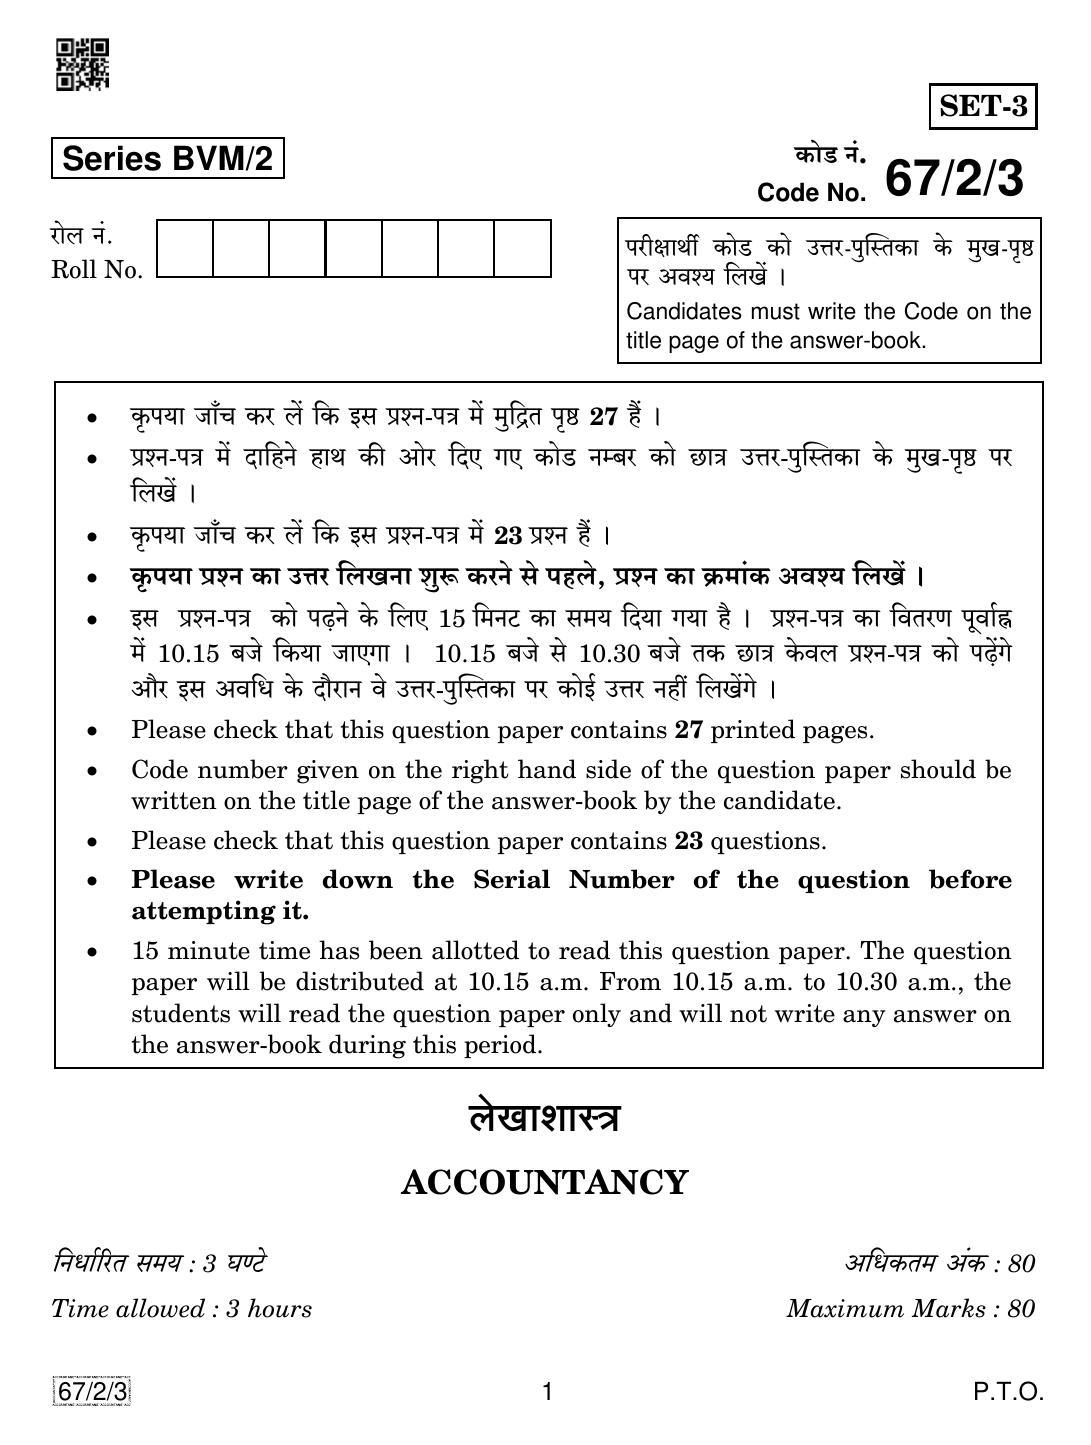 CBSE Class 12 67-2-3 Accountancy 2019 Question Paper - Page 1